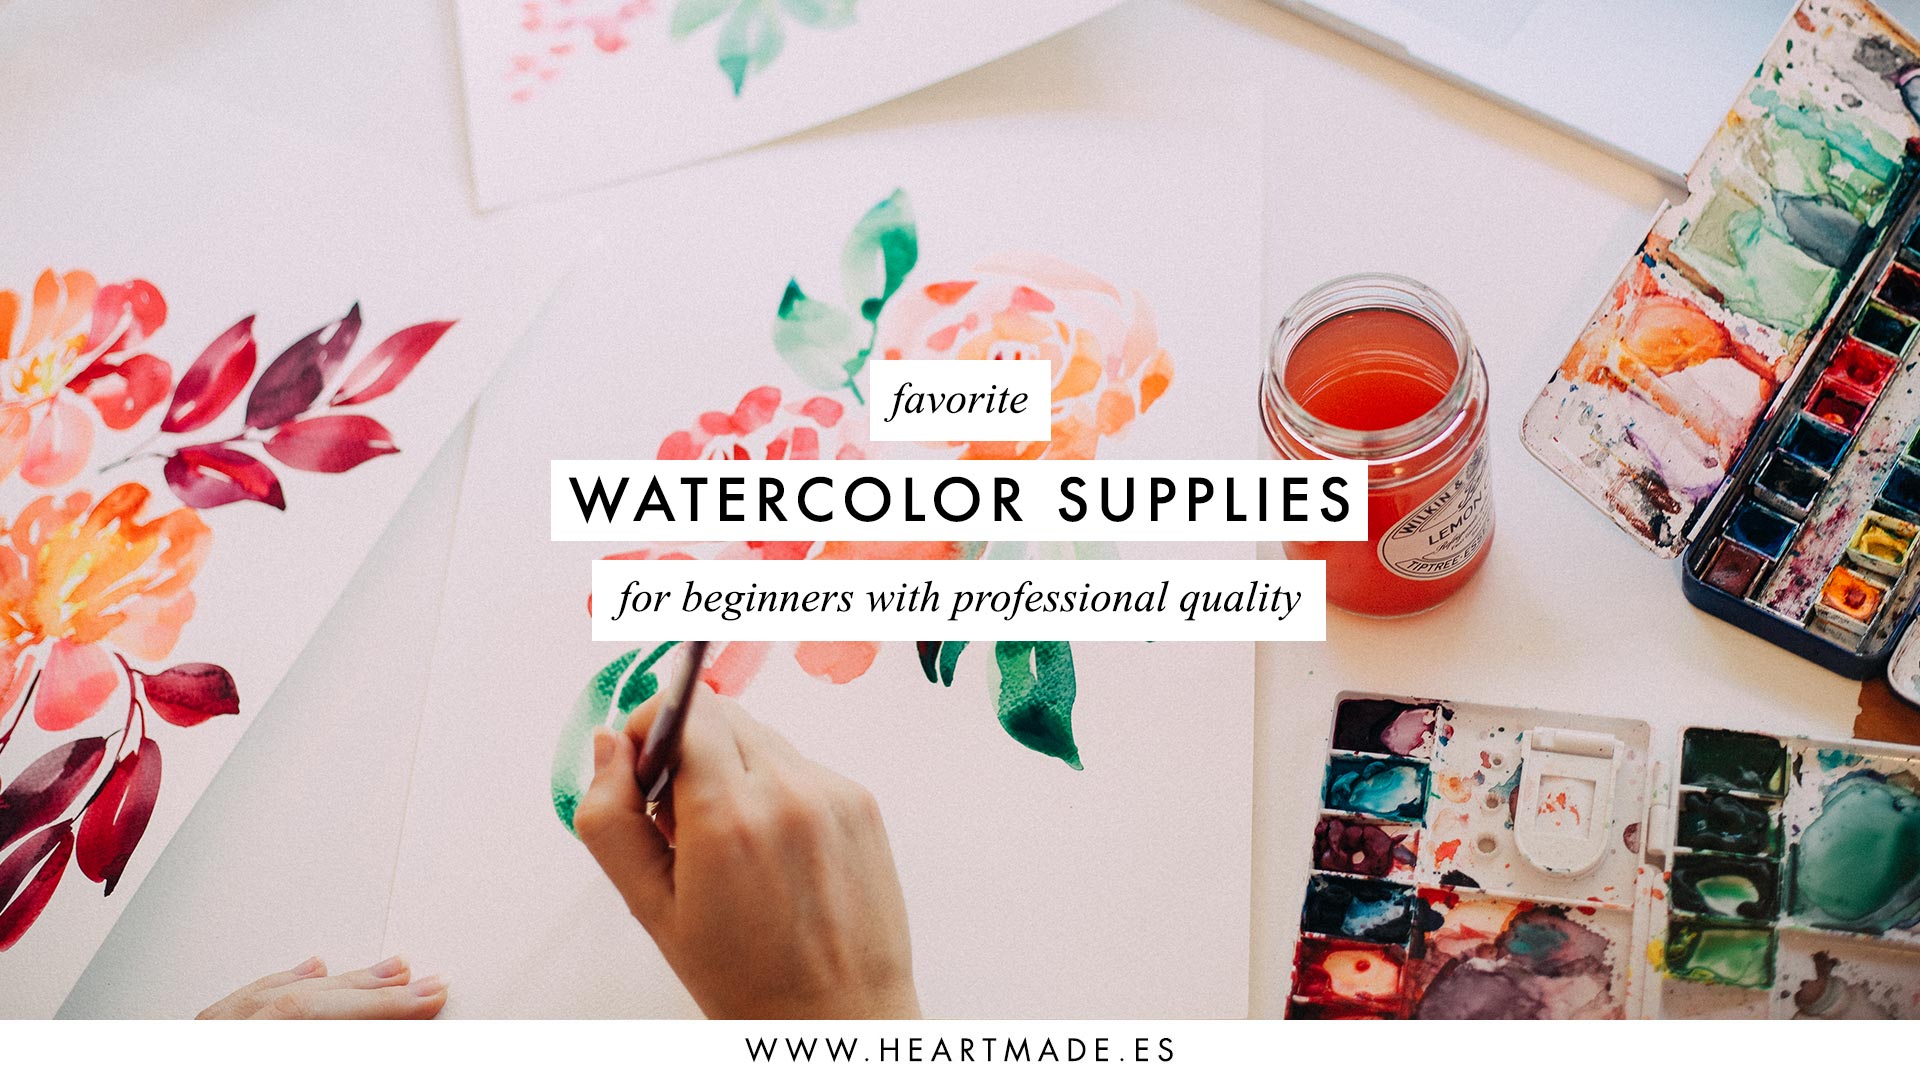 Watercolor Supplies for Beginners with Professional Quality